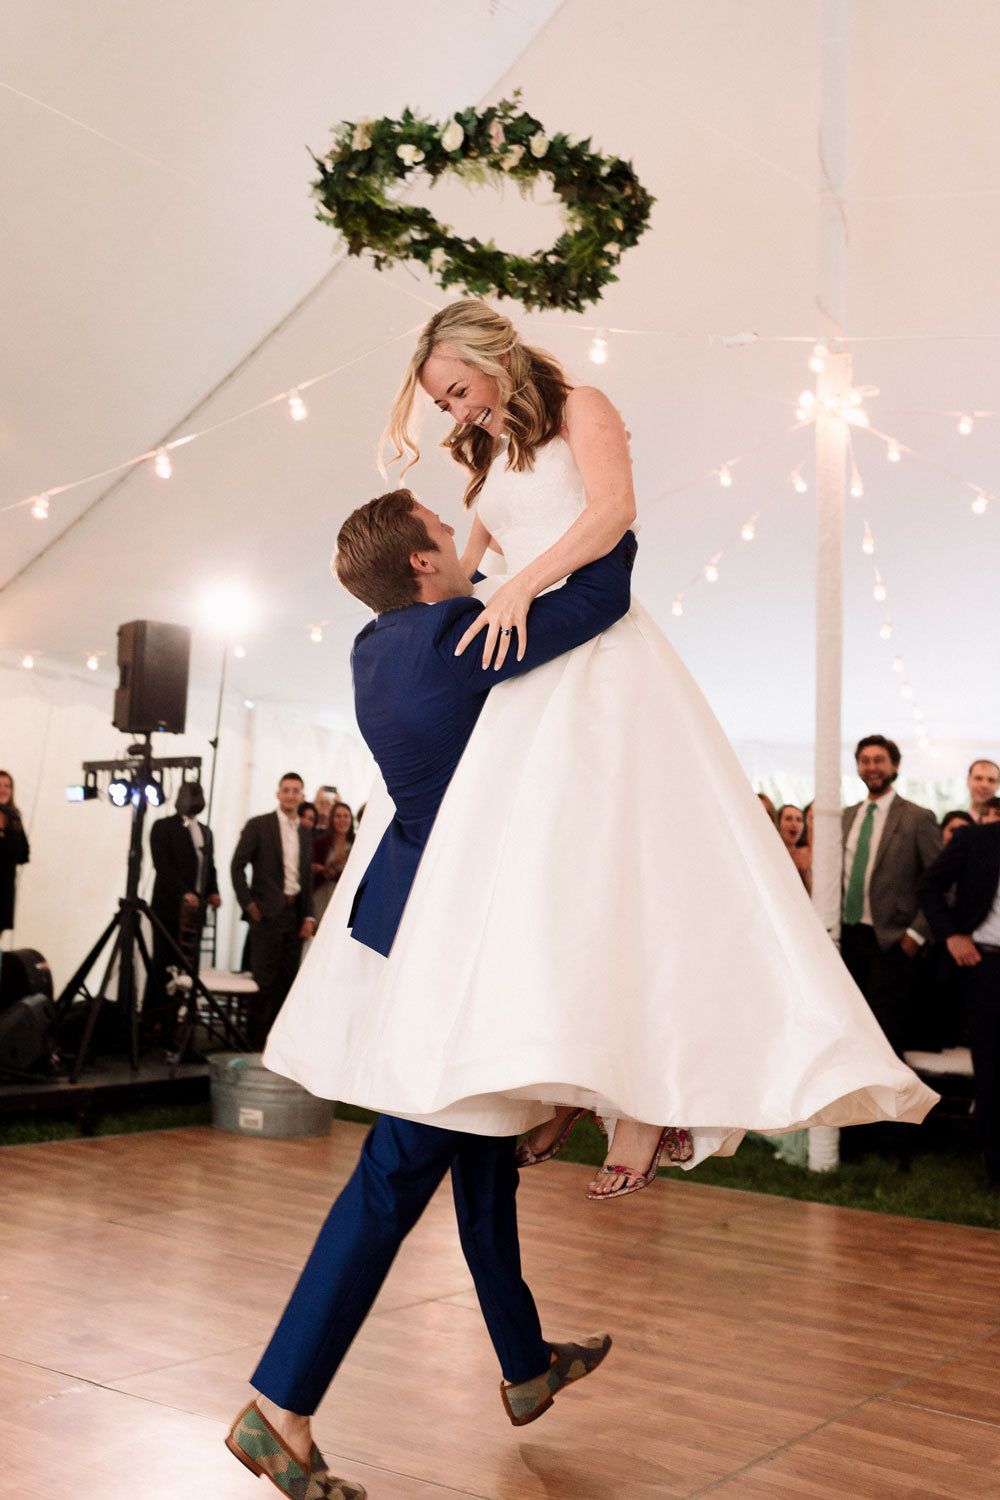 Alex Pardying wearing kilim shoes is lifting up Christina, his new wife, on dance floor at their wedding.